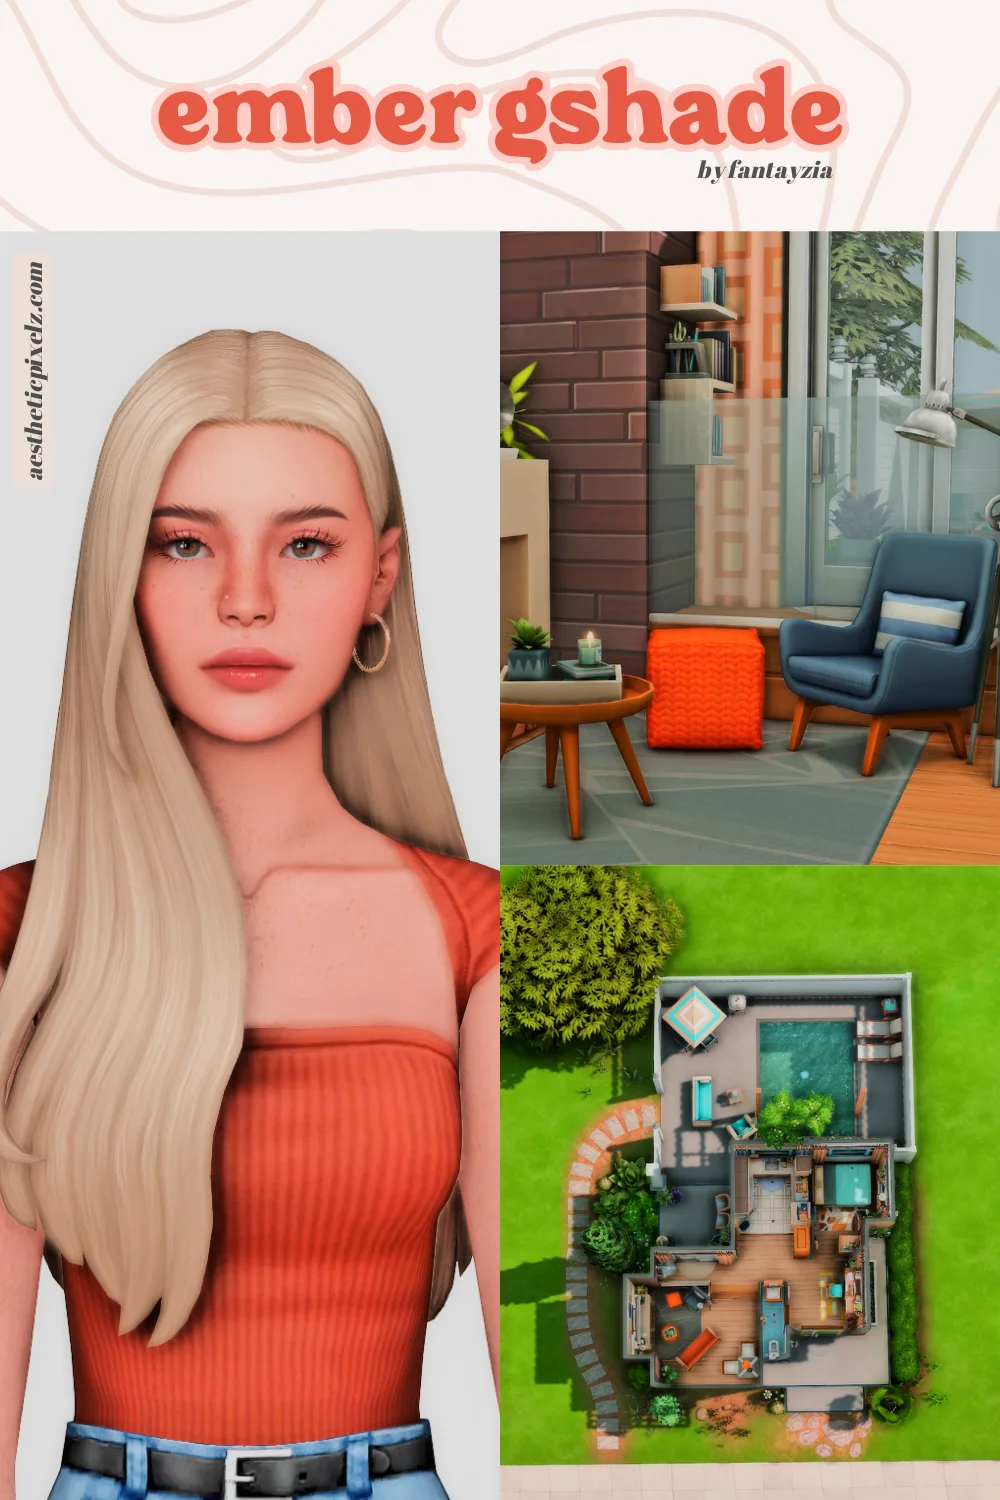 images showing off the ember gshade for the sims 4